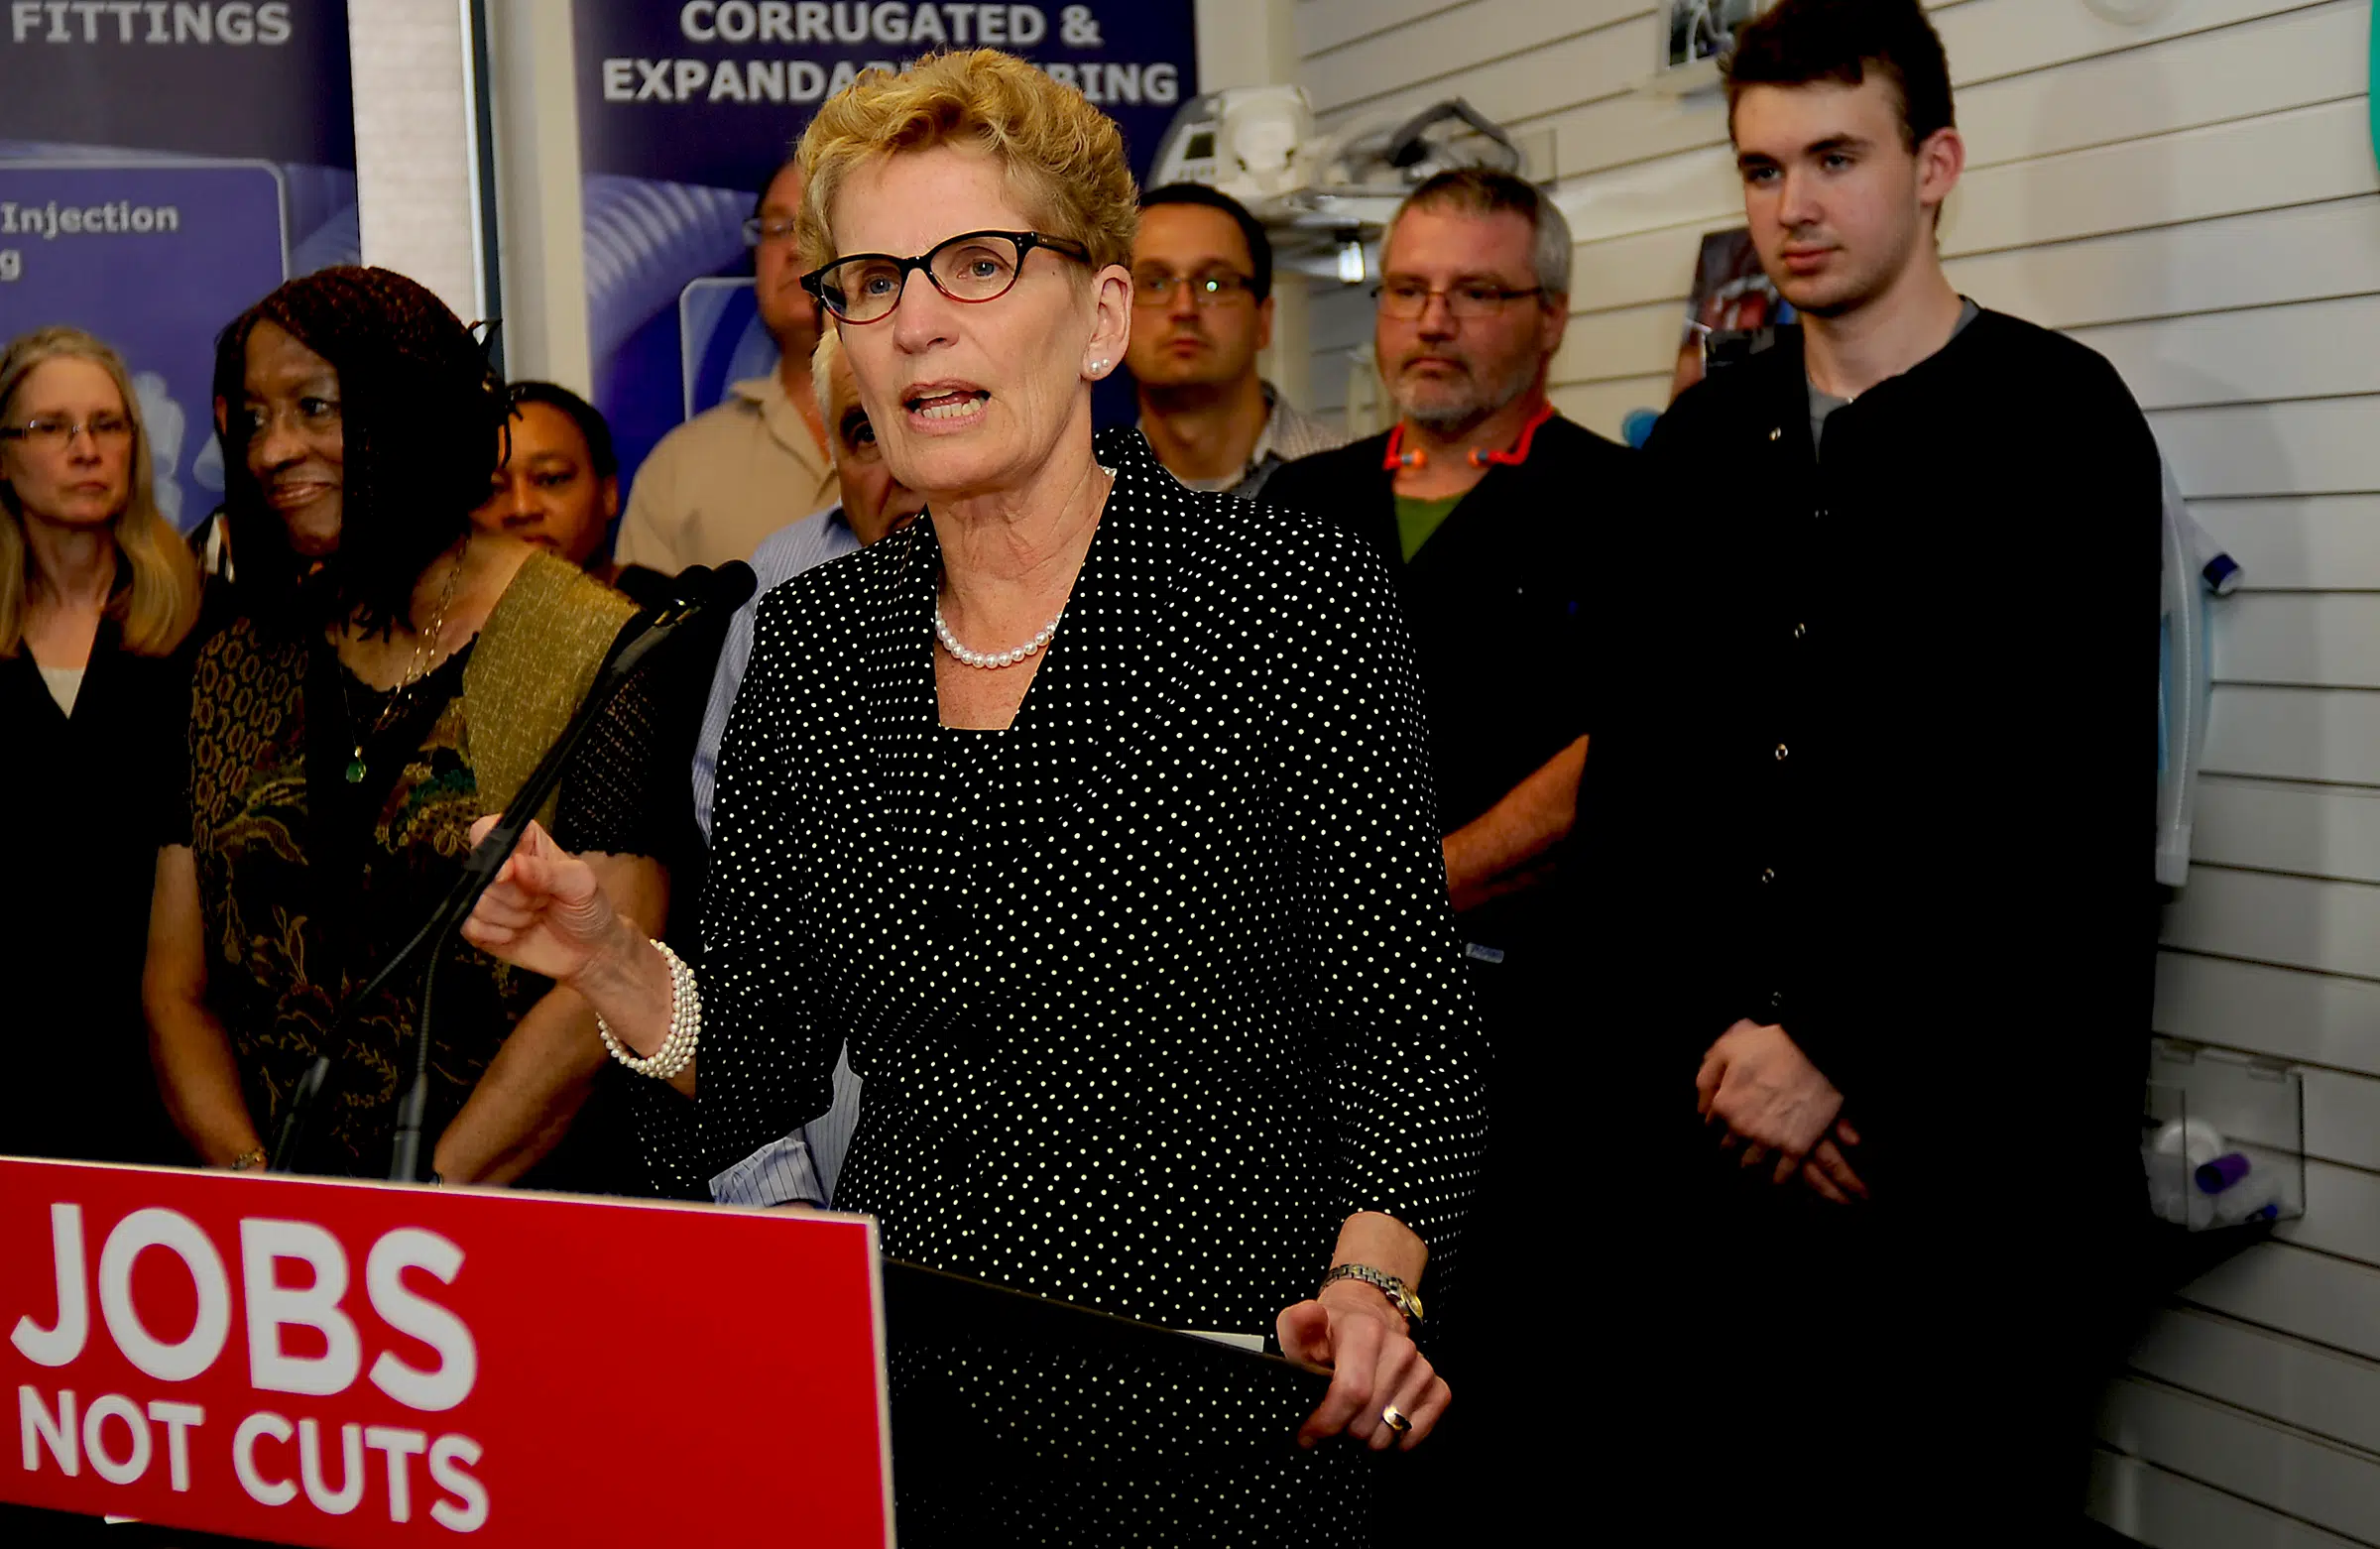 Ontario to increase minimum wage to $15 an hour in 2019